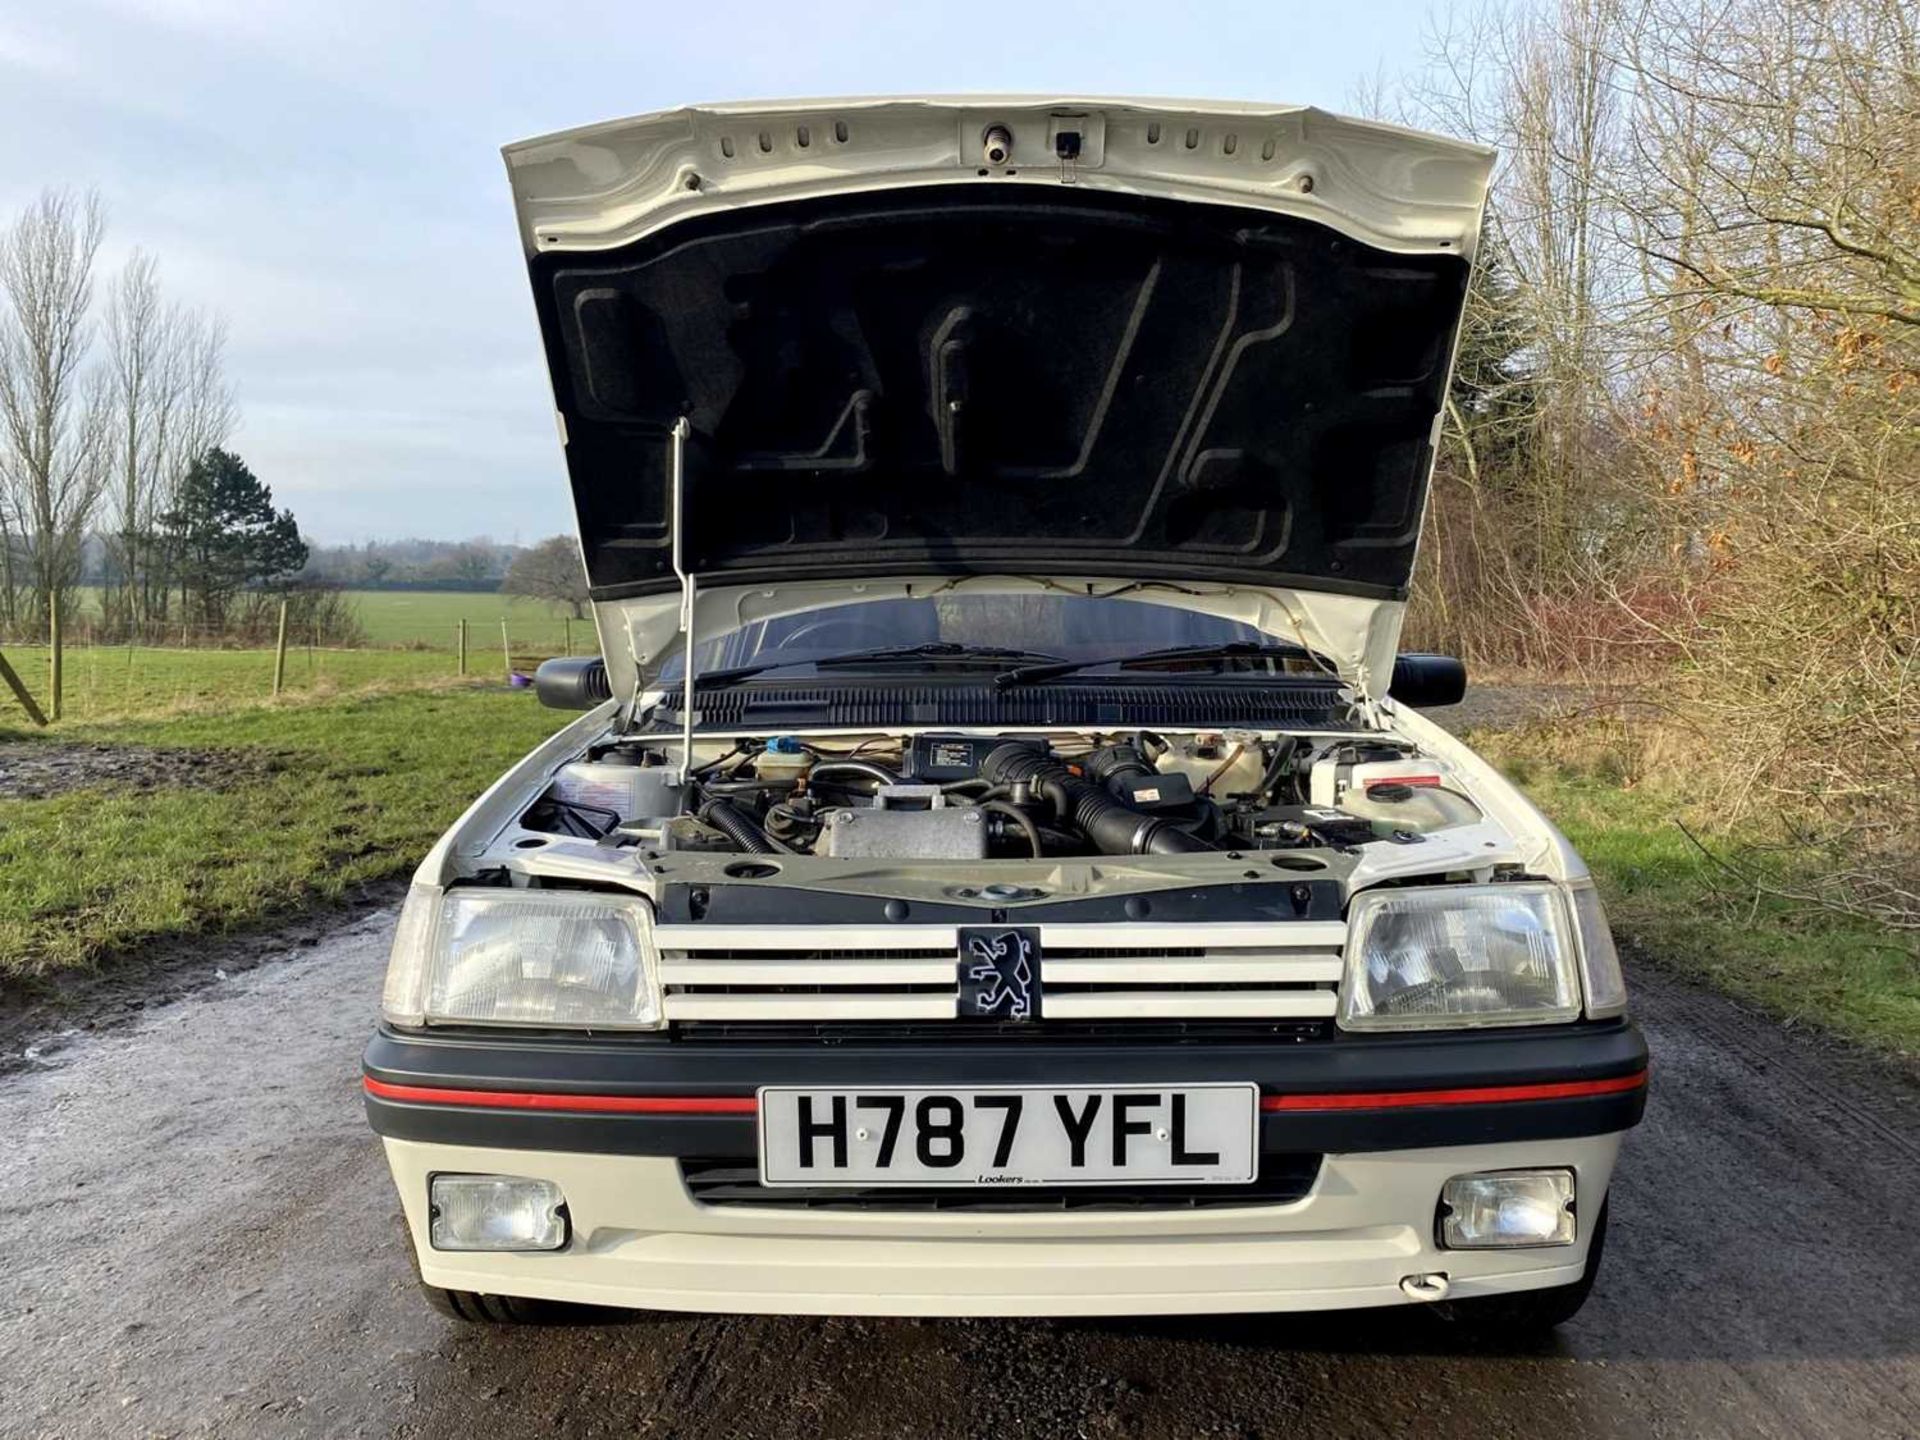 1990 Peugeot 205 GTi 1.6 Only 56,000 miles, same owner for 16 years - Image 13 of 81